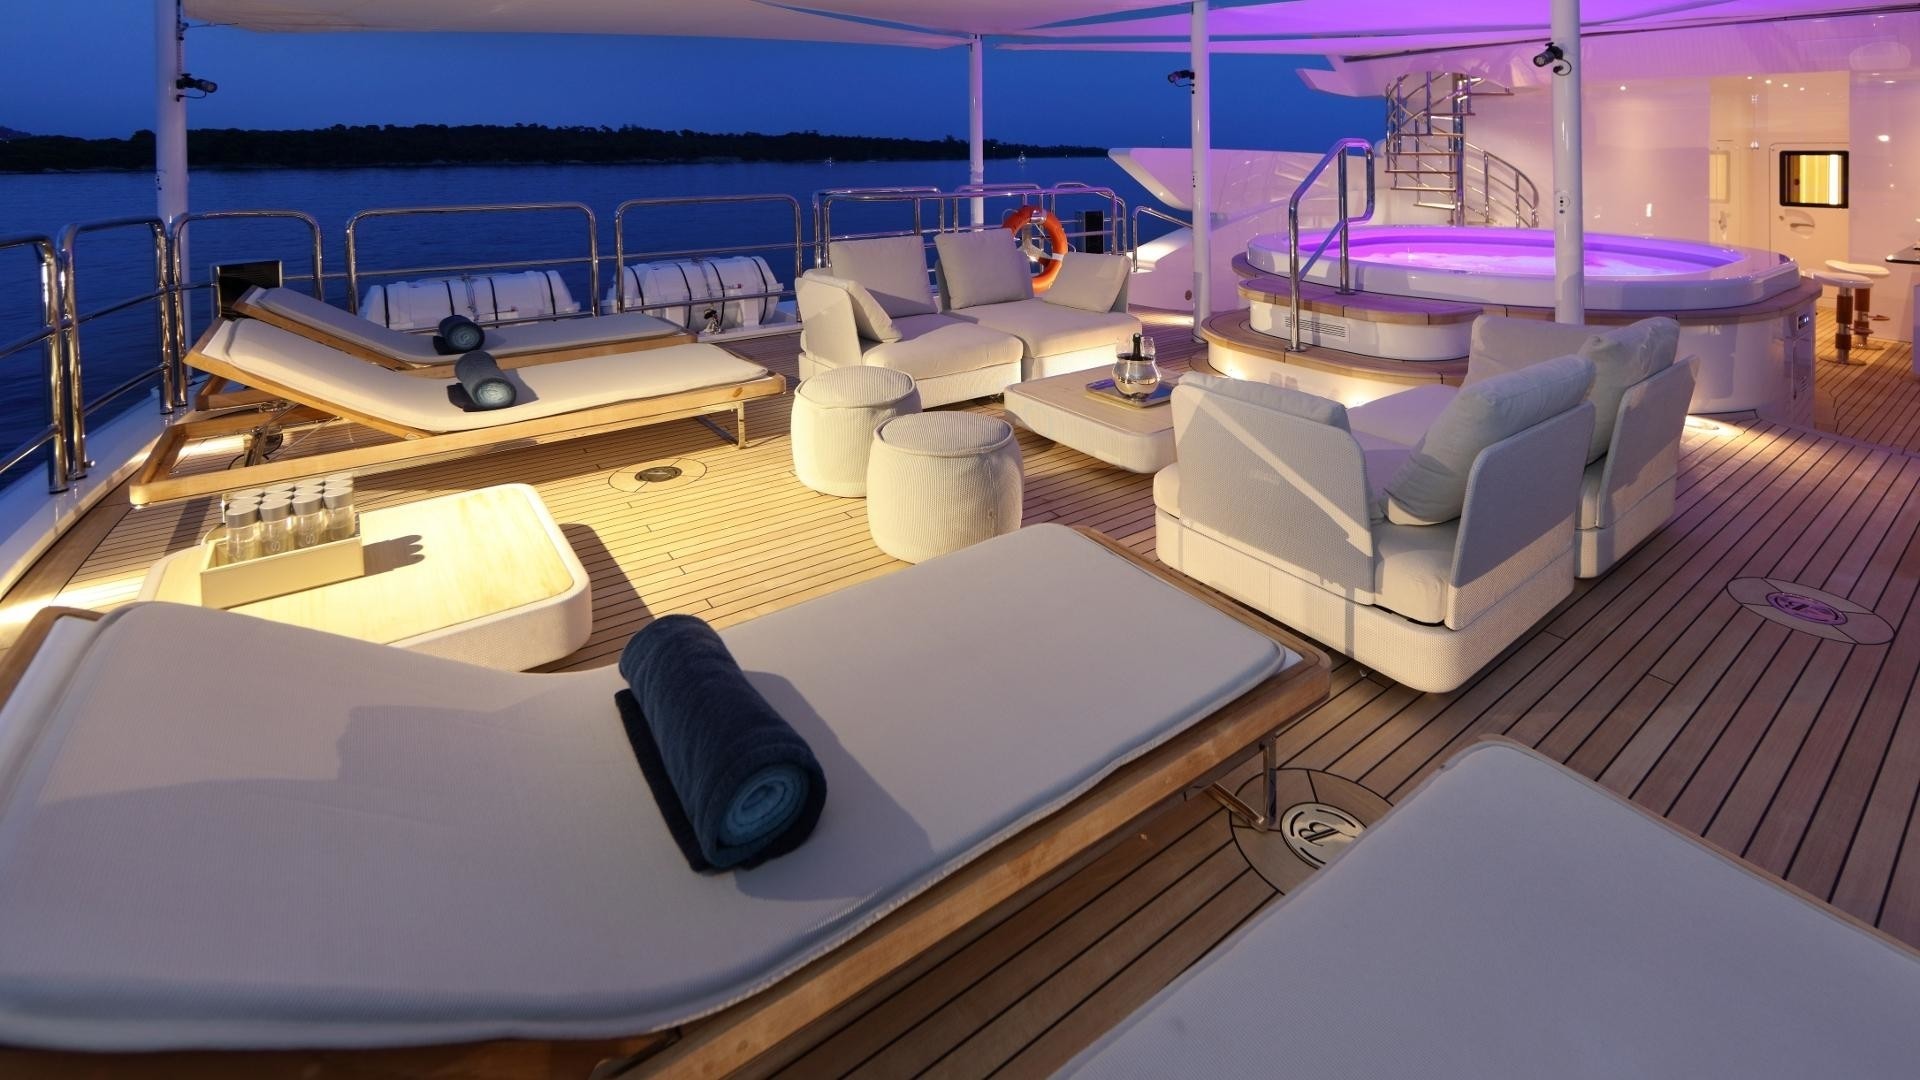 Jacuzzi on the sun deck with sunbeds after sunset